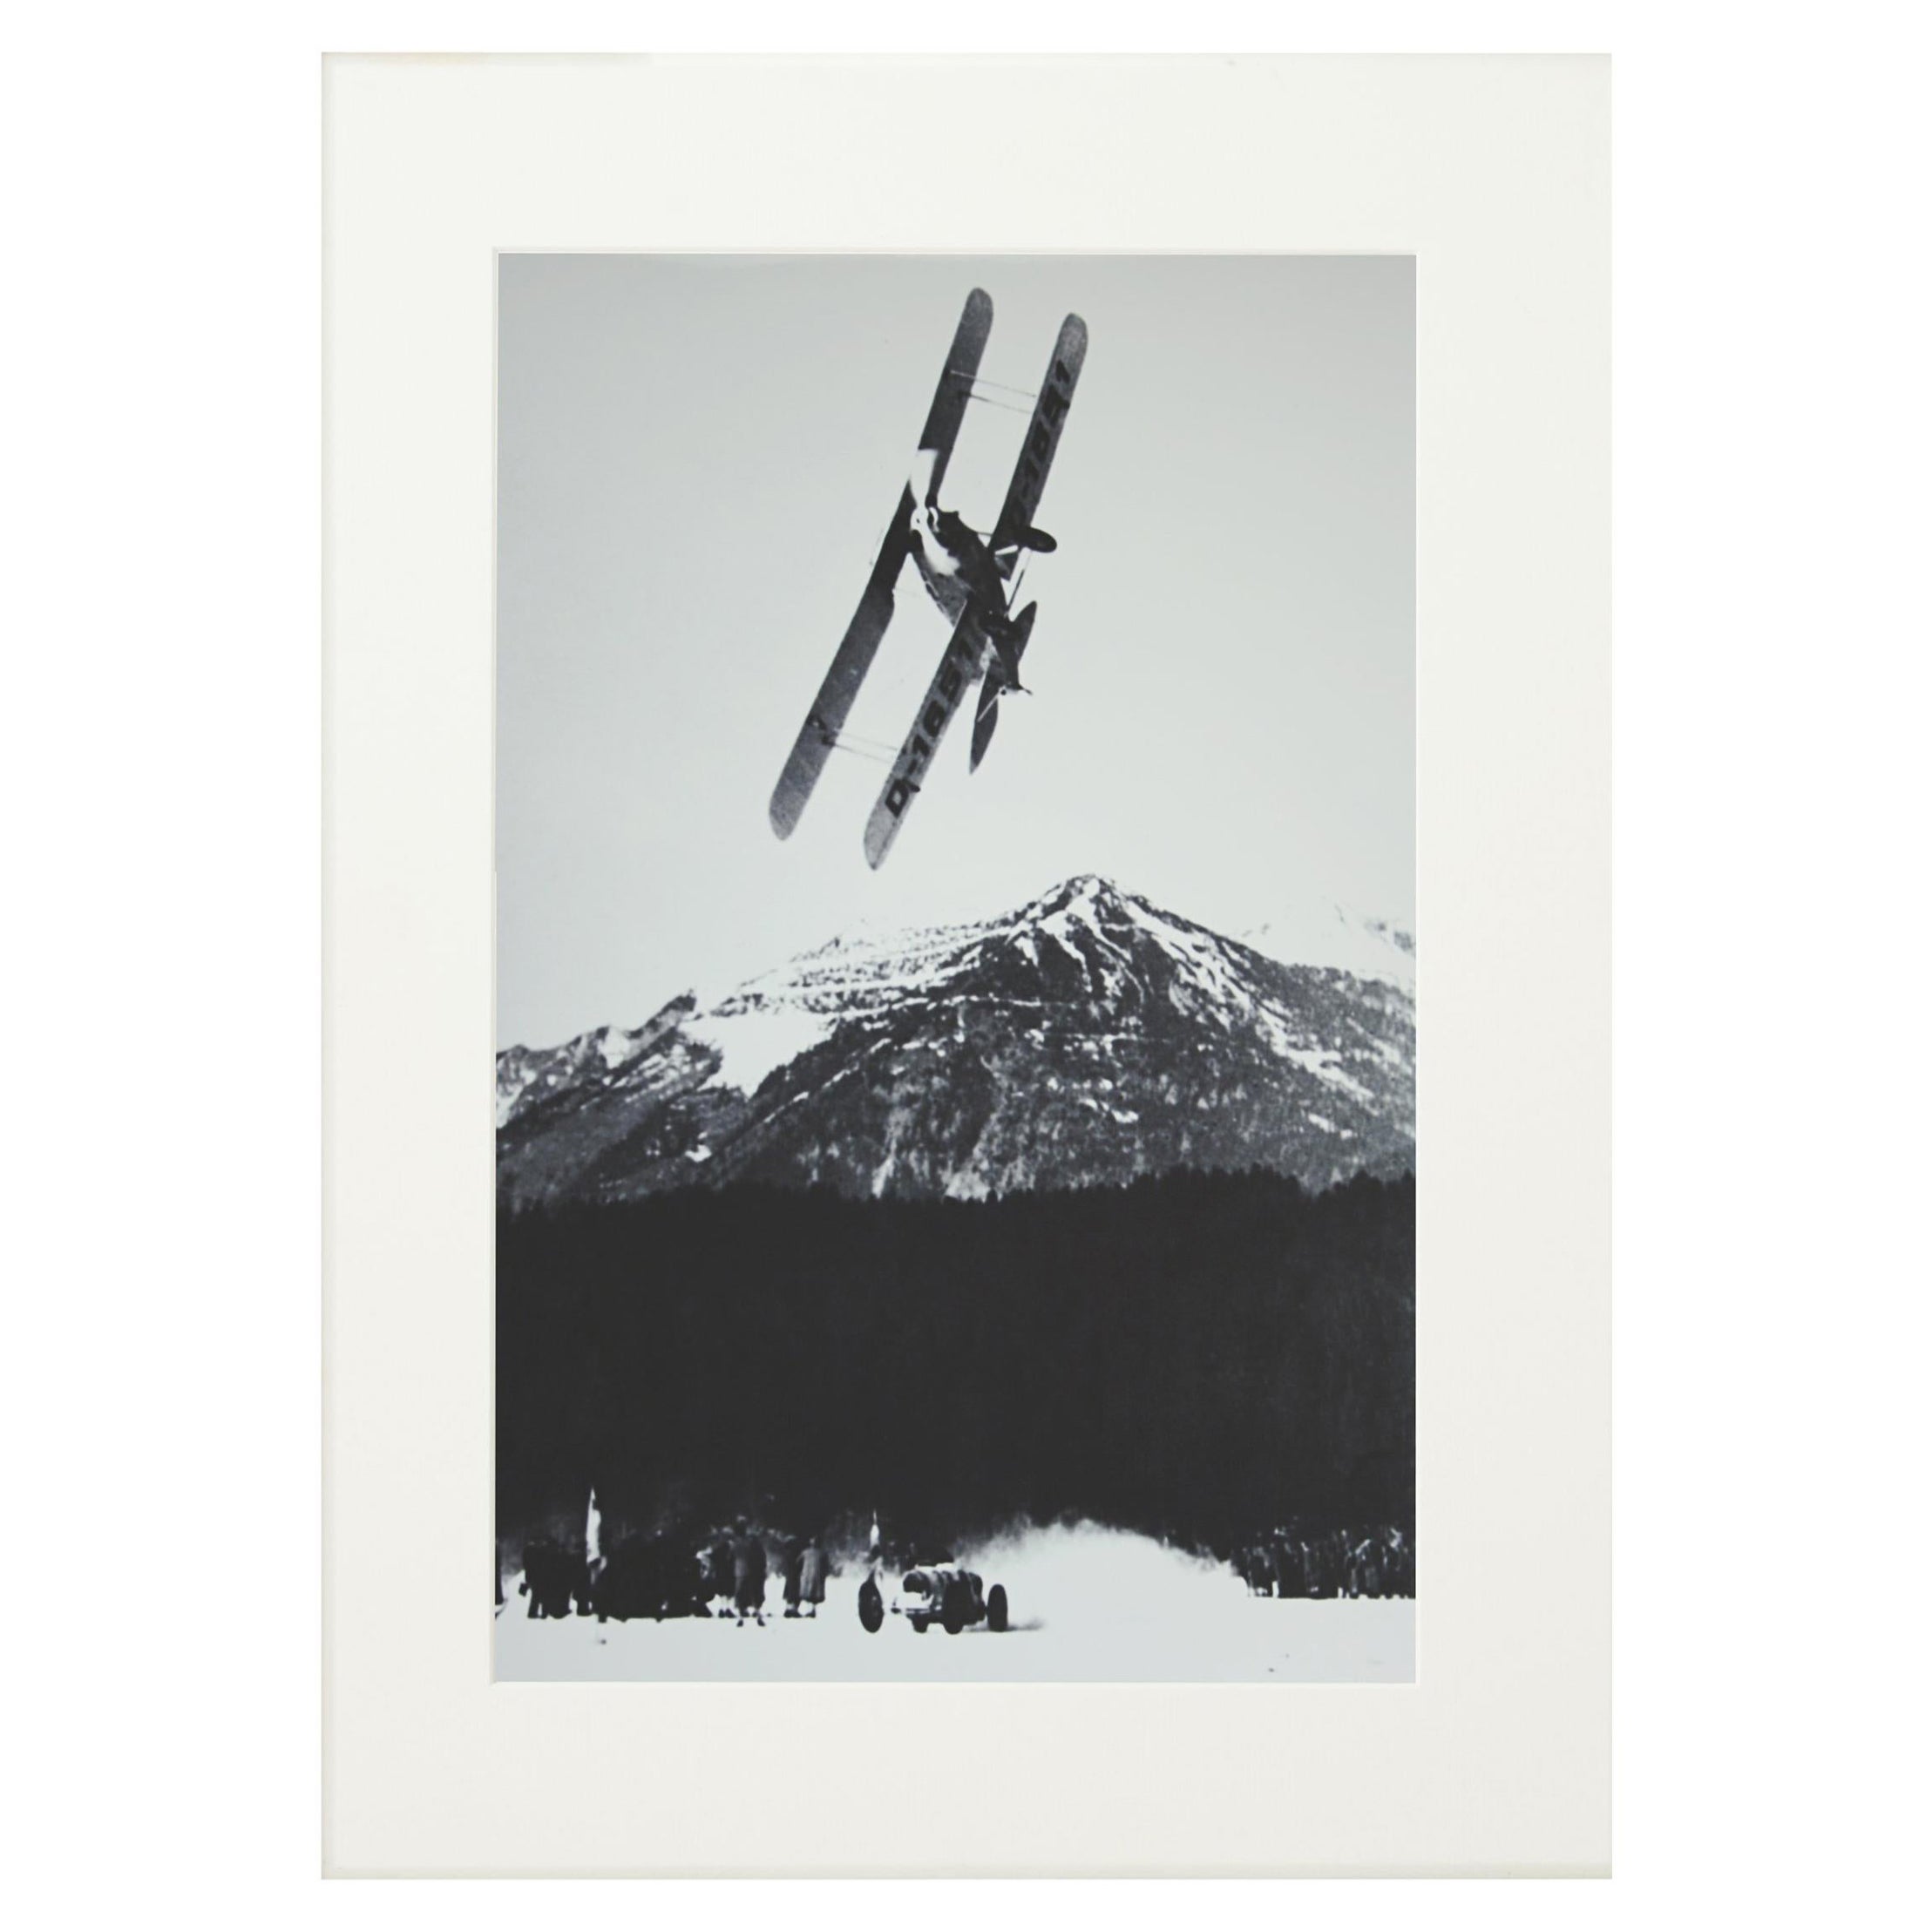 Alpine Ski Photograph, 'The Race' Taken from Original 1930s Photograph For Sale